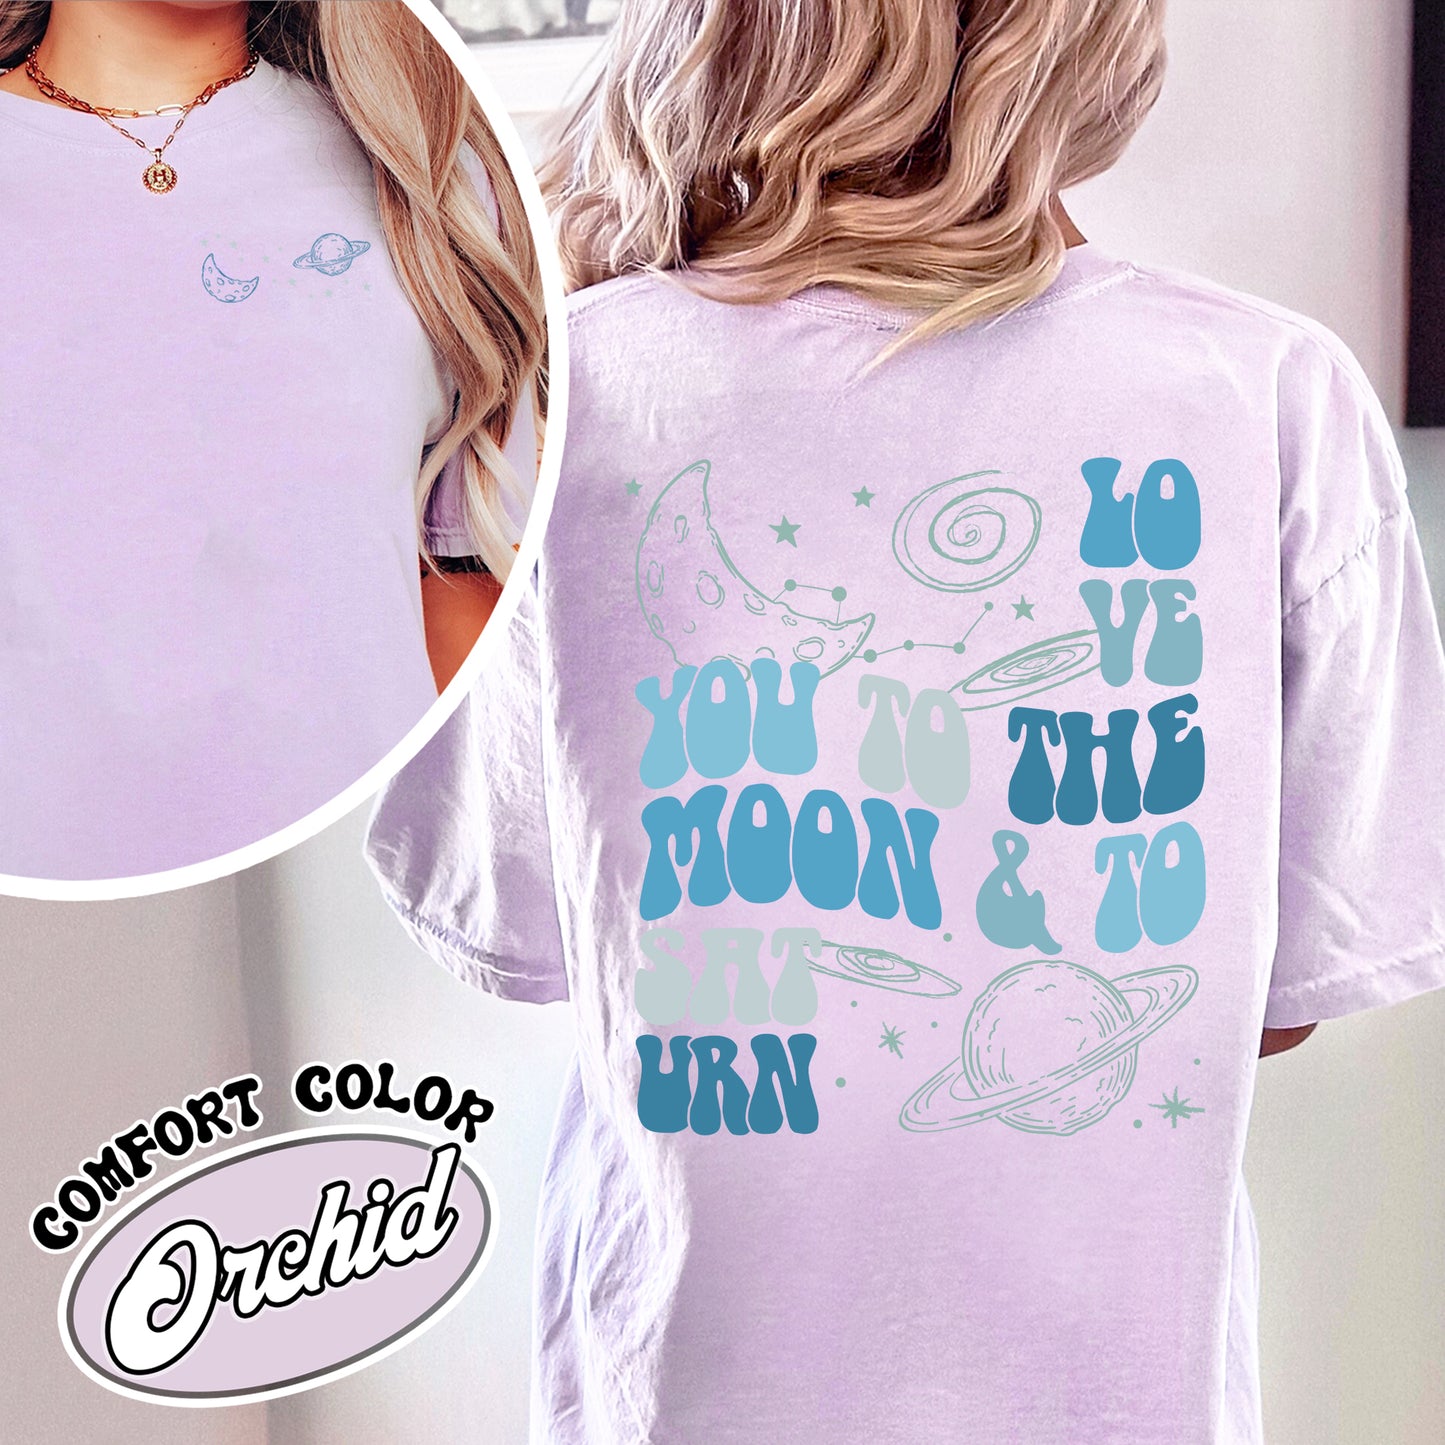 I Love You to the Moon and Saturn Comfort Color Shirt, Love You to the Moon and to Saturn, Swiftie Shirt, Gift for Fan, Cute Shirts